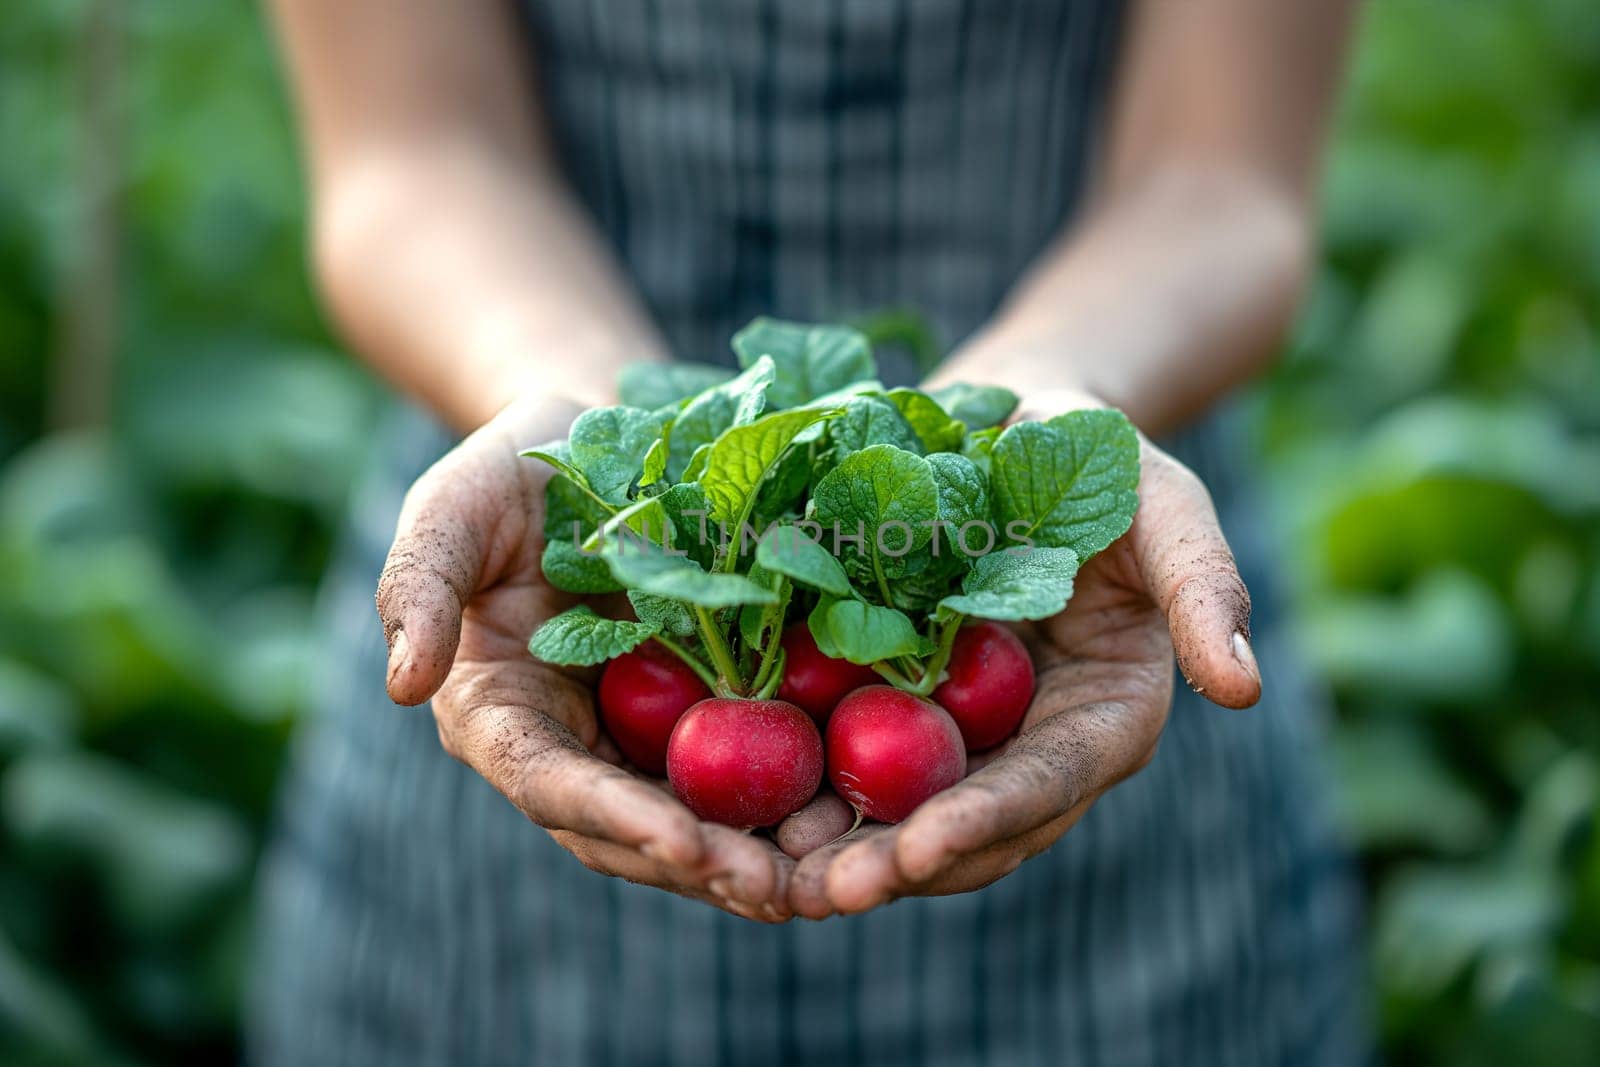 Hands of a woman holding a radish in a vegetable garden. by Sd28DimoN_1976